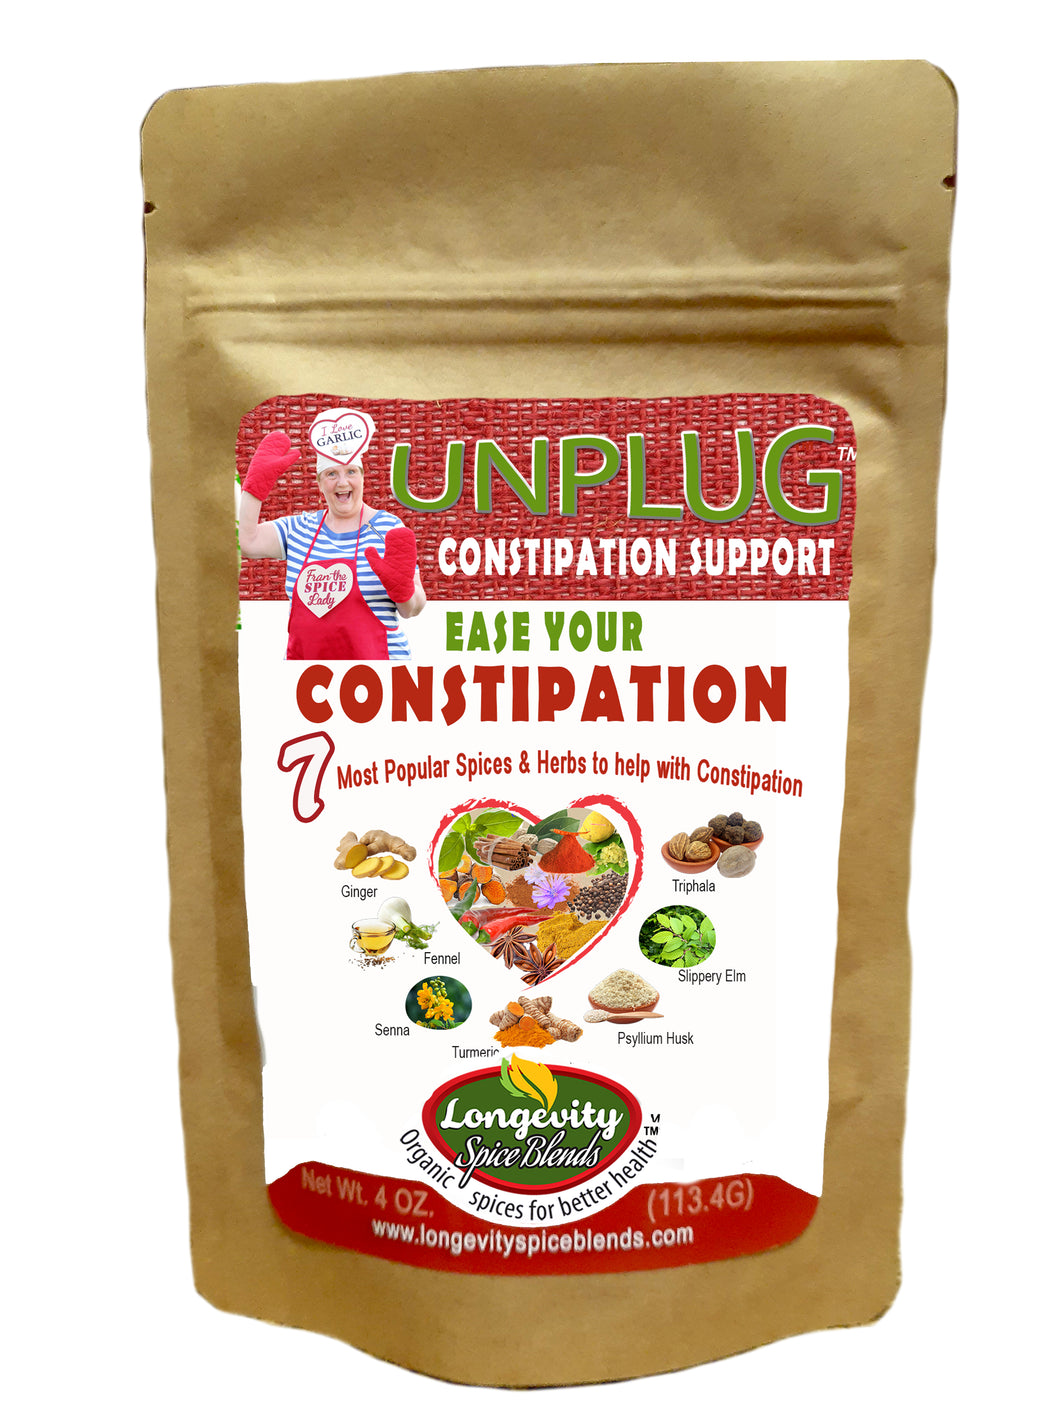 Constipation - UNPLUG - A natural solution for constipation relief